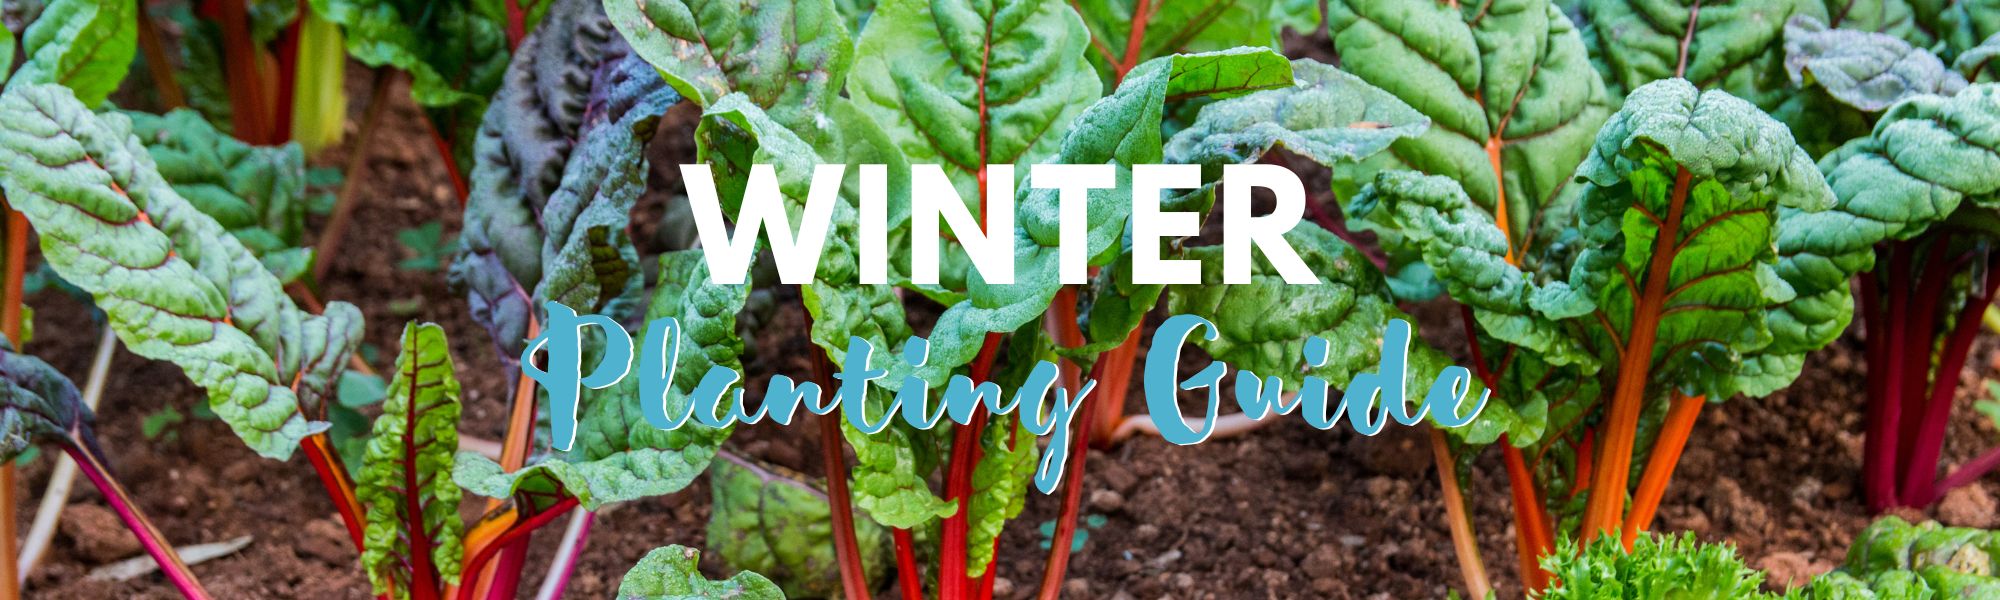 Winter Planting Guide